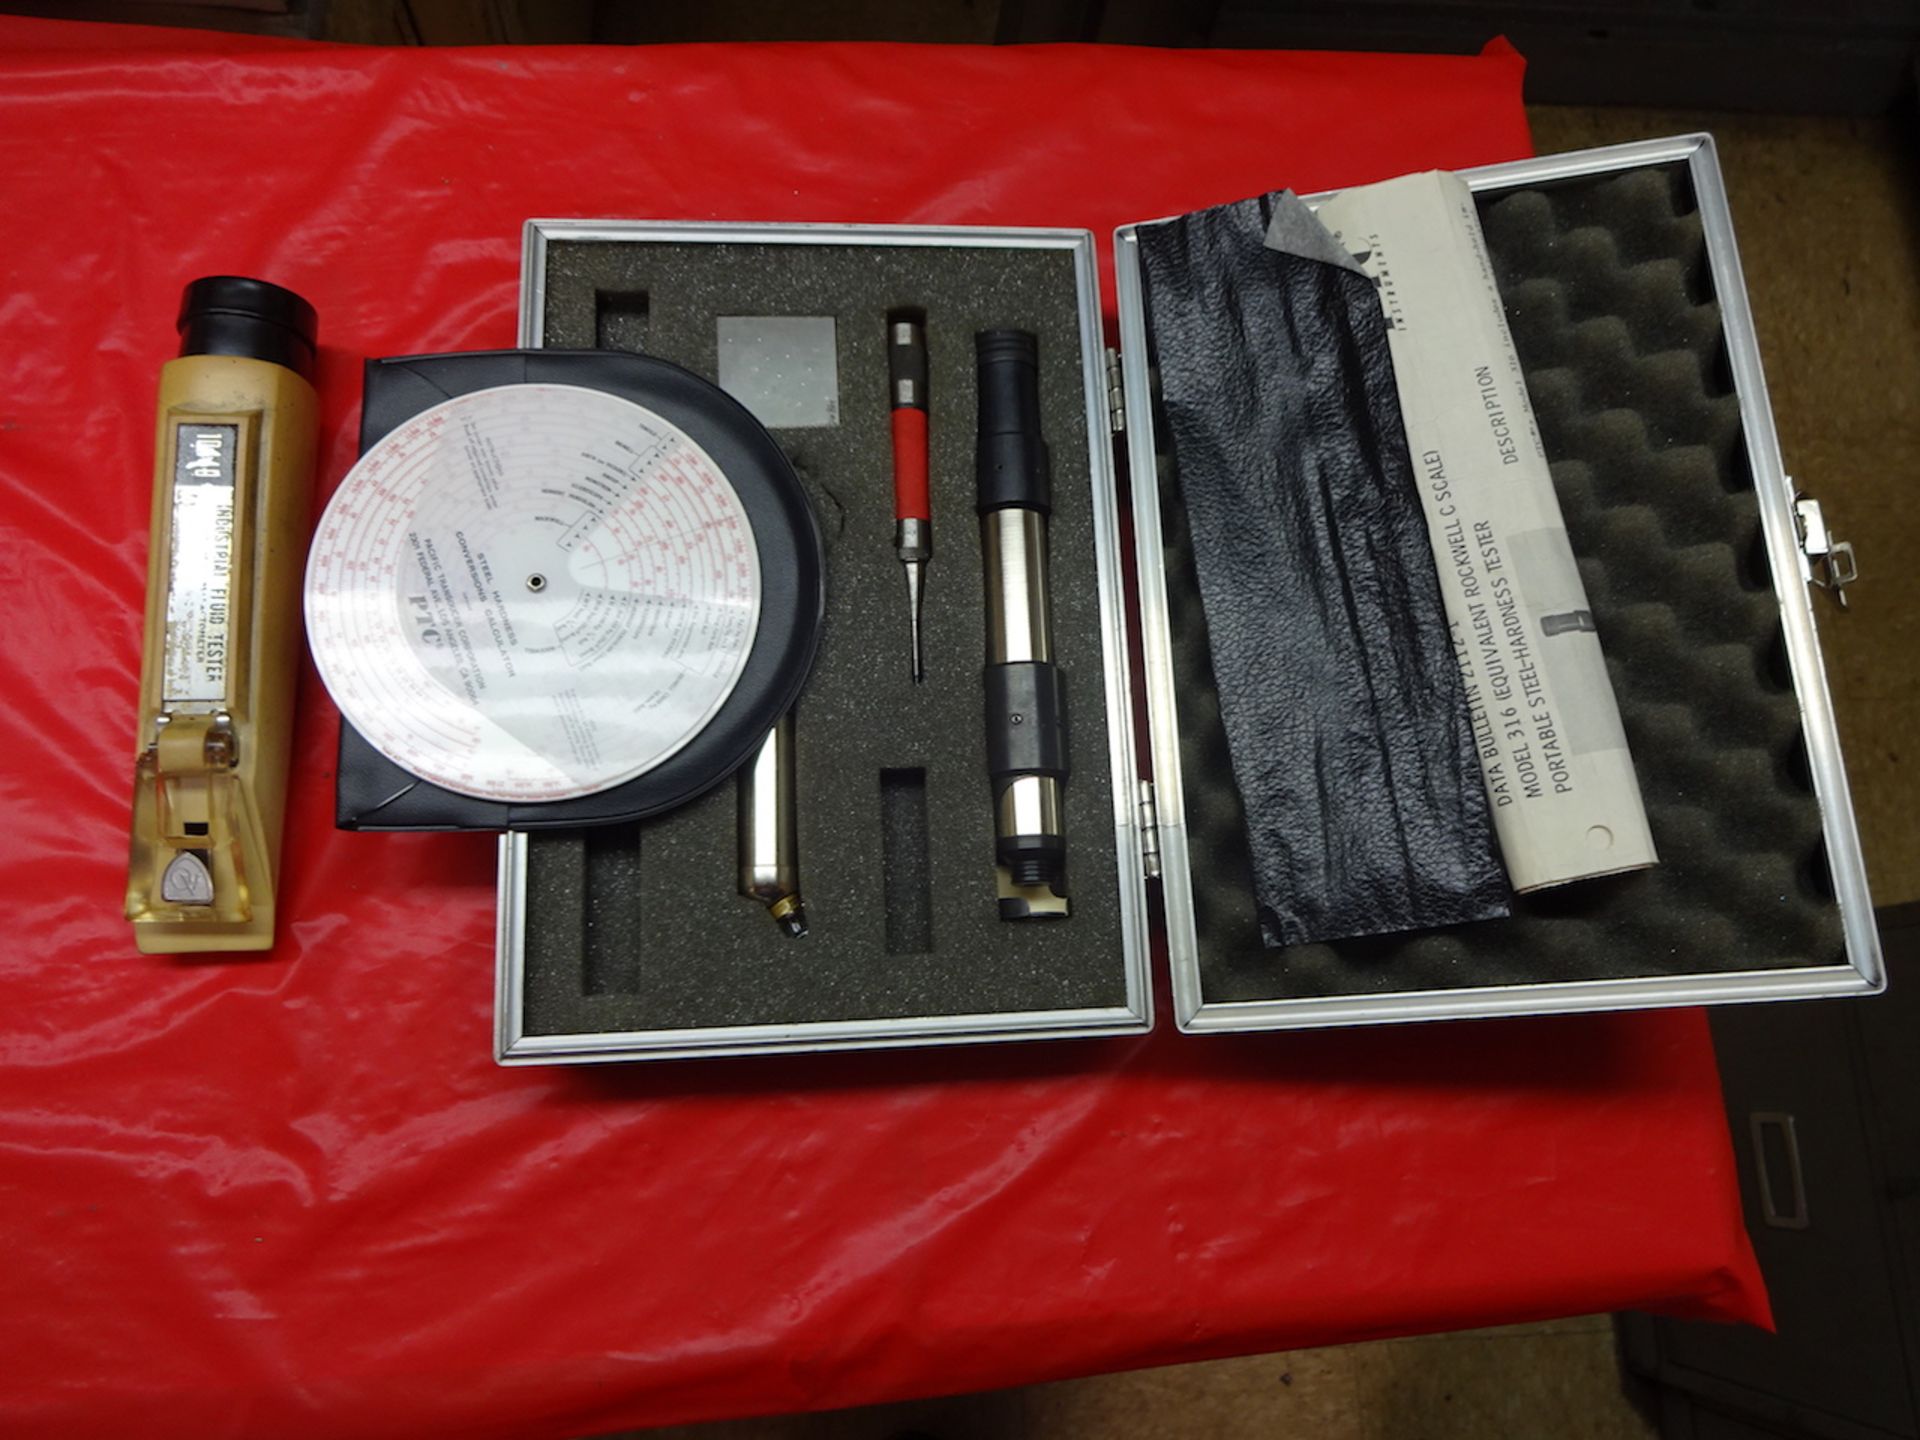 LOT: A.O. Instrument Co. Industrial Fluid Tester Refractometer, PTC Instruments Model 316 Portable